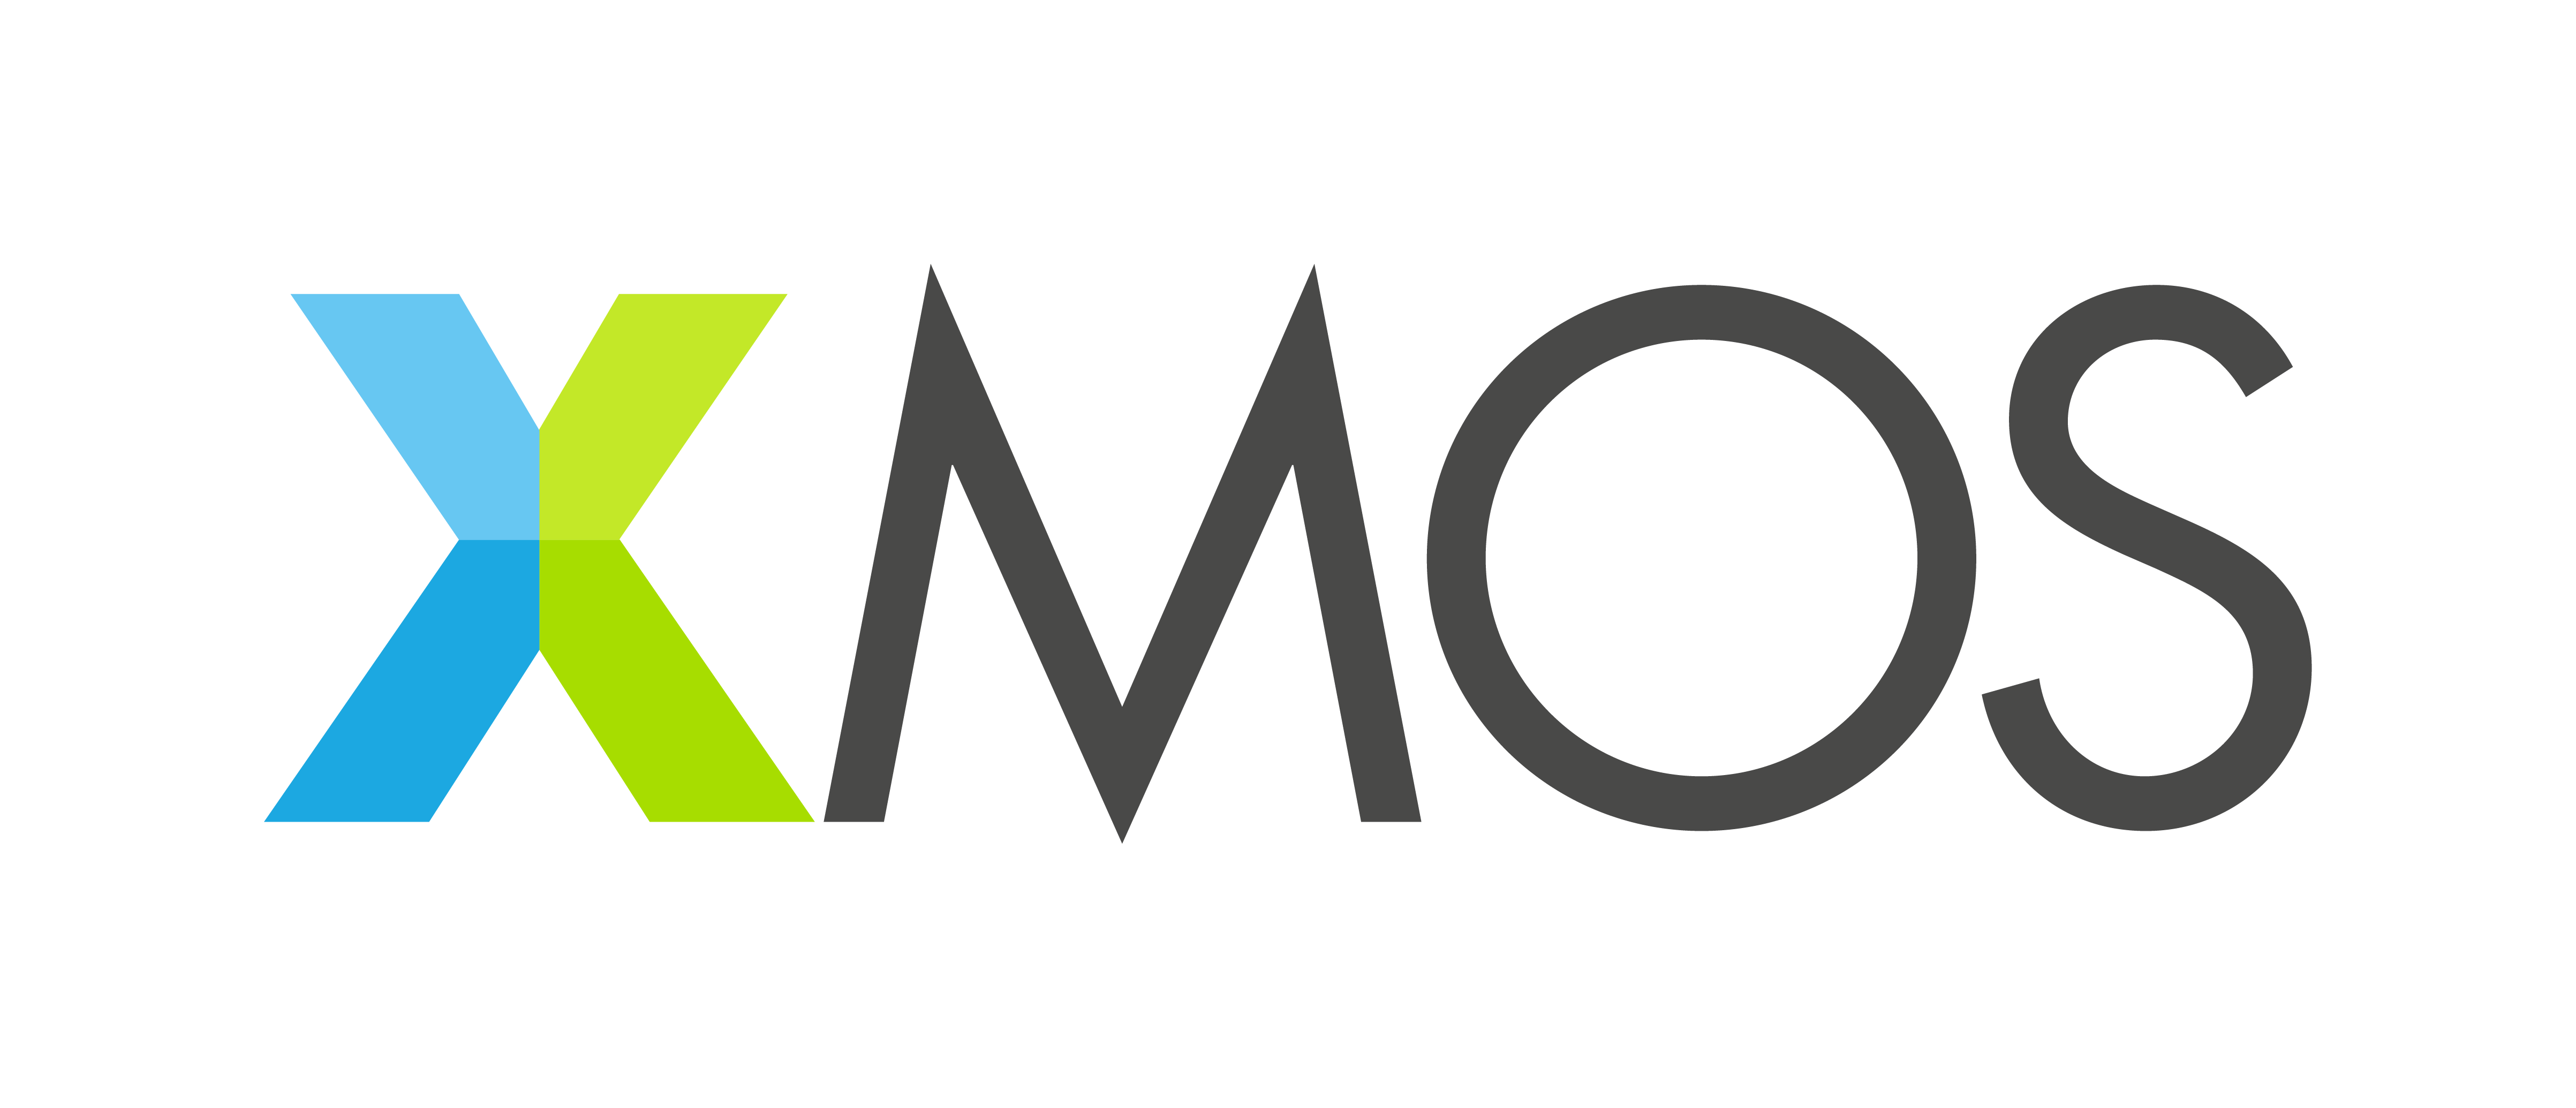 XMOS LIMITED